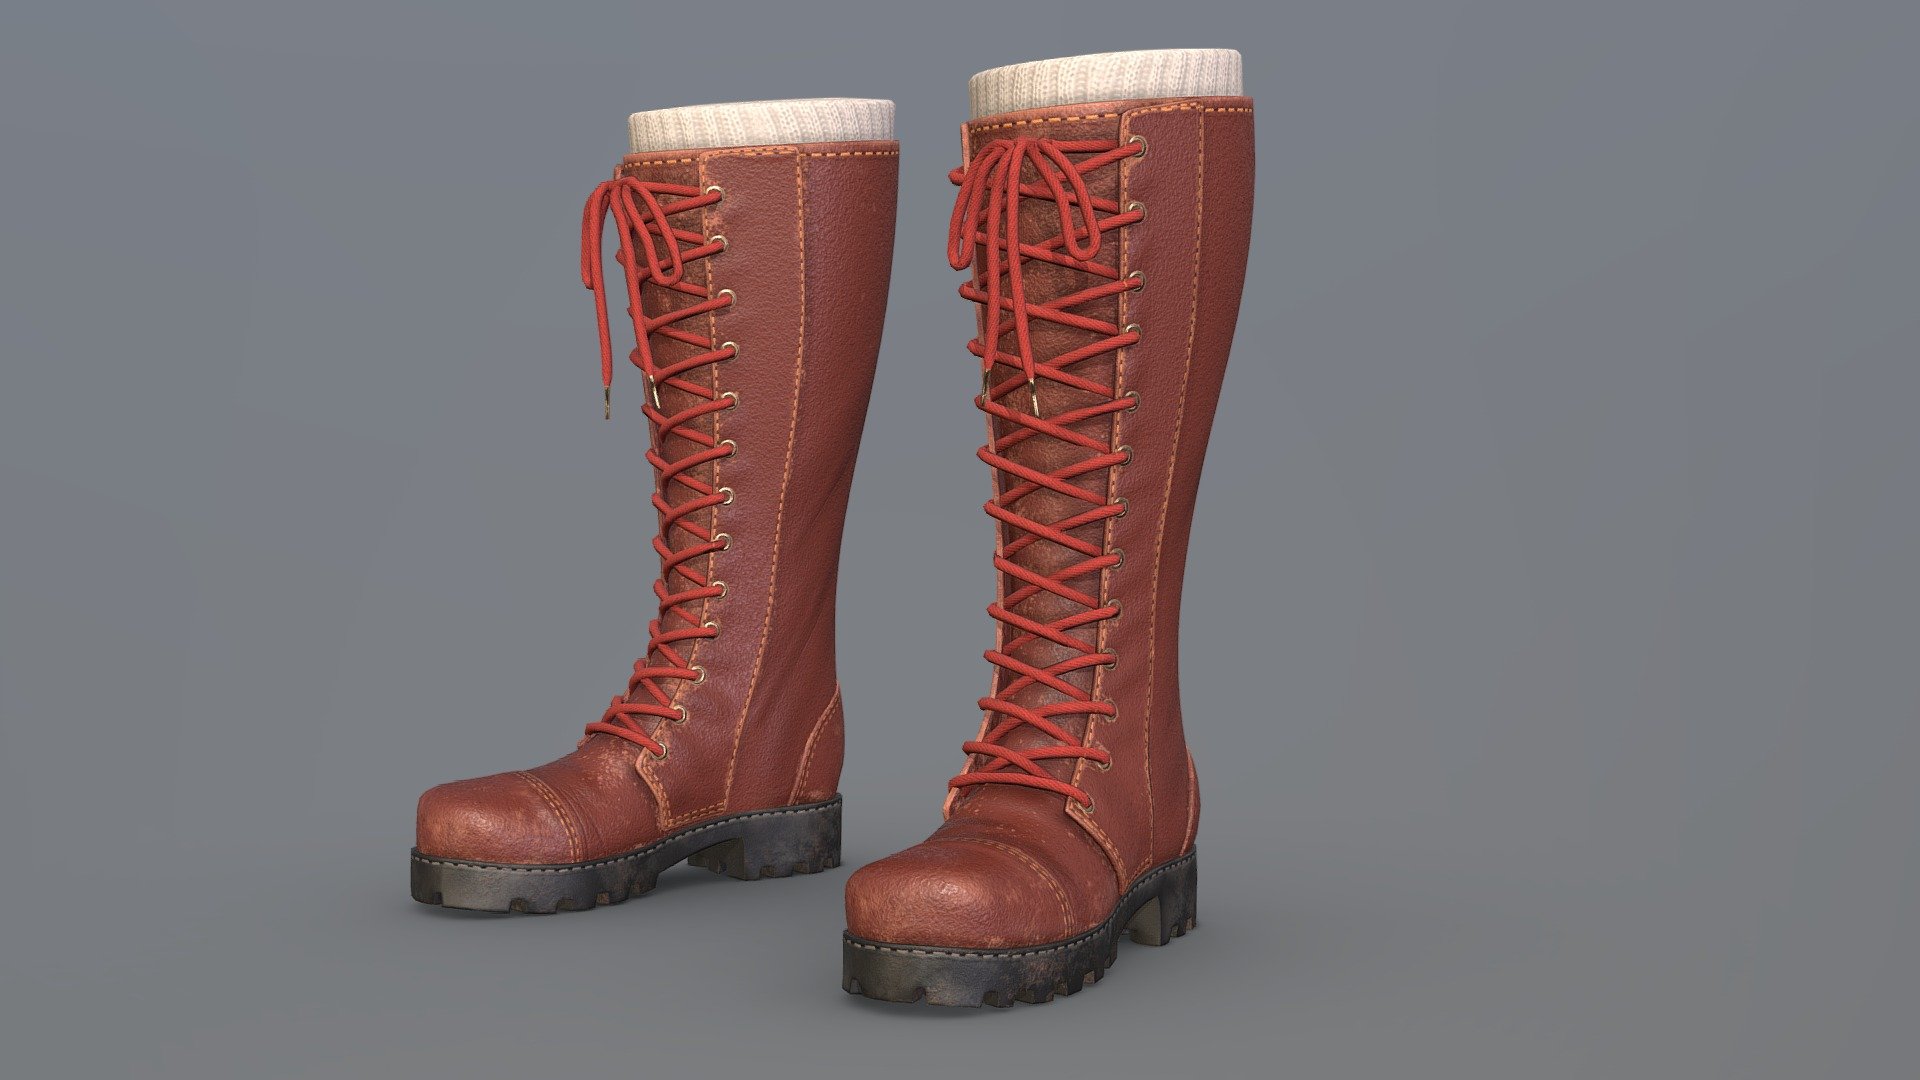 This 3D model features a highly-detailed and accurate representation of Lara Croft's classic boots. These iconic boots were first introduced in the original Tomb Raider video game series and have since become a staple of Lara Croft's iconic look.

The model is rendered in high-quality and features a range of intricate details, from the laces and buckles to the subtle wear and tear of the leather. The boots are modeled to scale, ensuring that they are as close to the real thing as possible.

Whether you're a fan of the Tomb Raider series or simply appreciate high-quality 3D models, this Lara Croft Classic Boots model is sure to impress. With its attention to detail and faithful representation of an iconic piece of gaming history, it's a must-have for any 3D modeling enthusiast 3d model